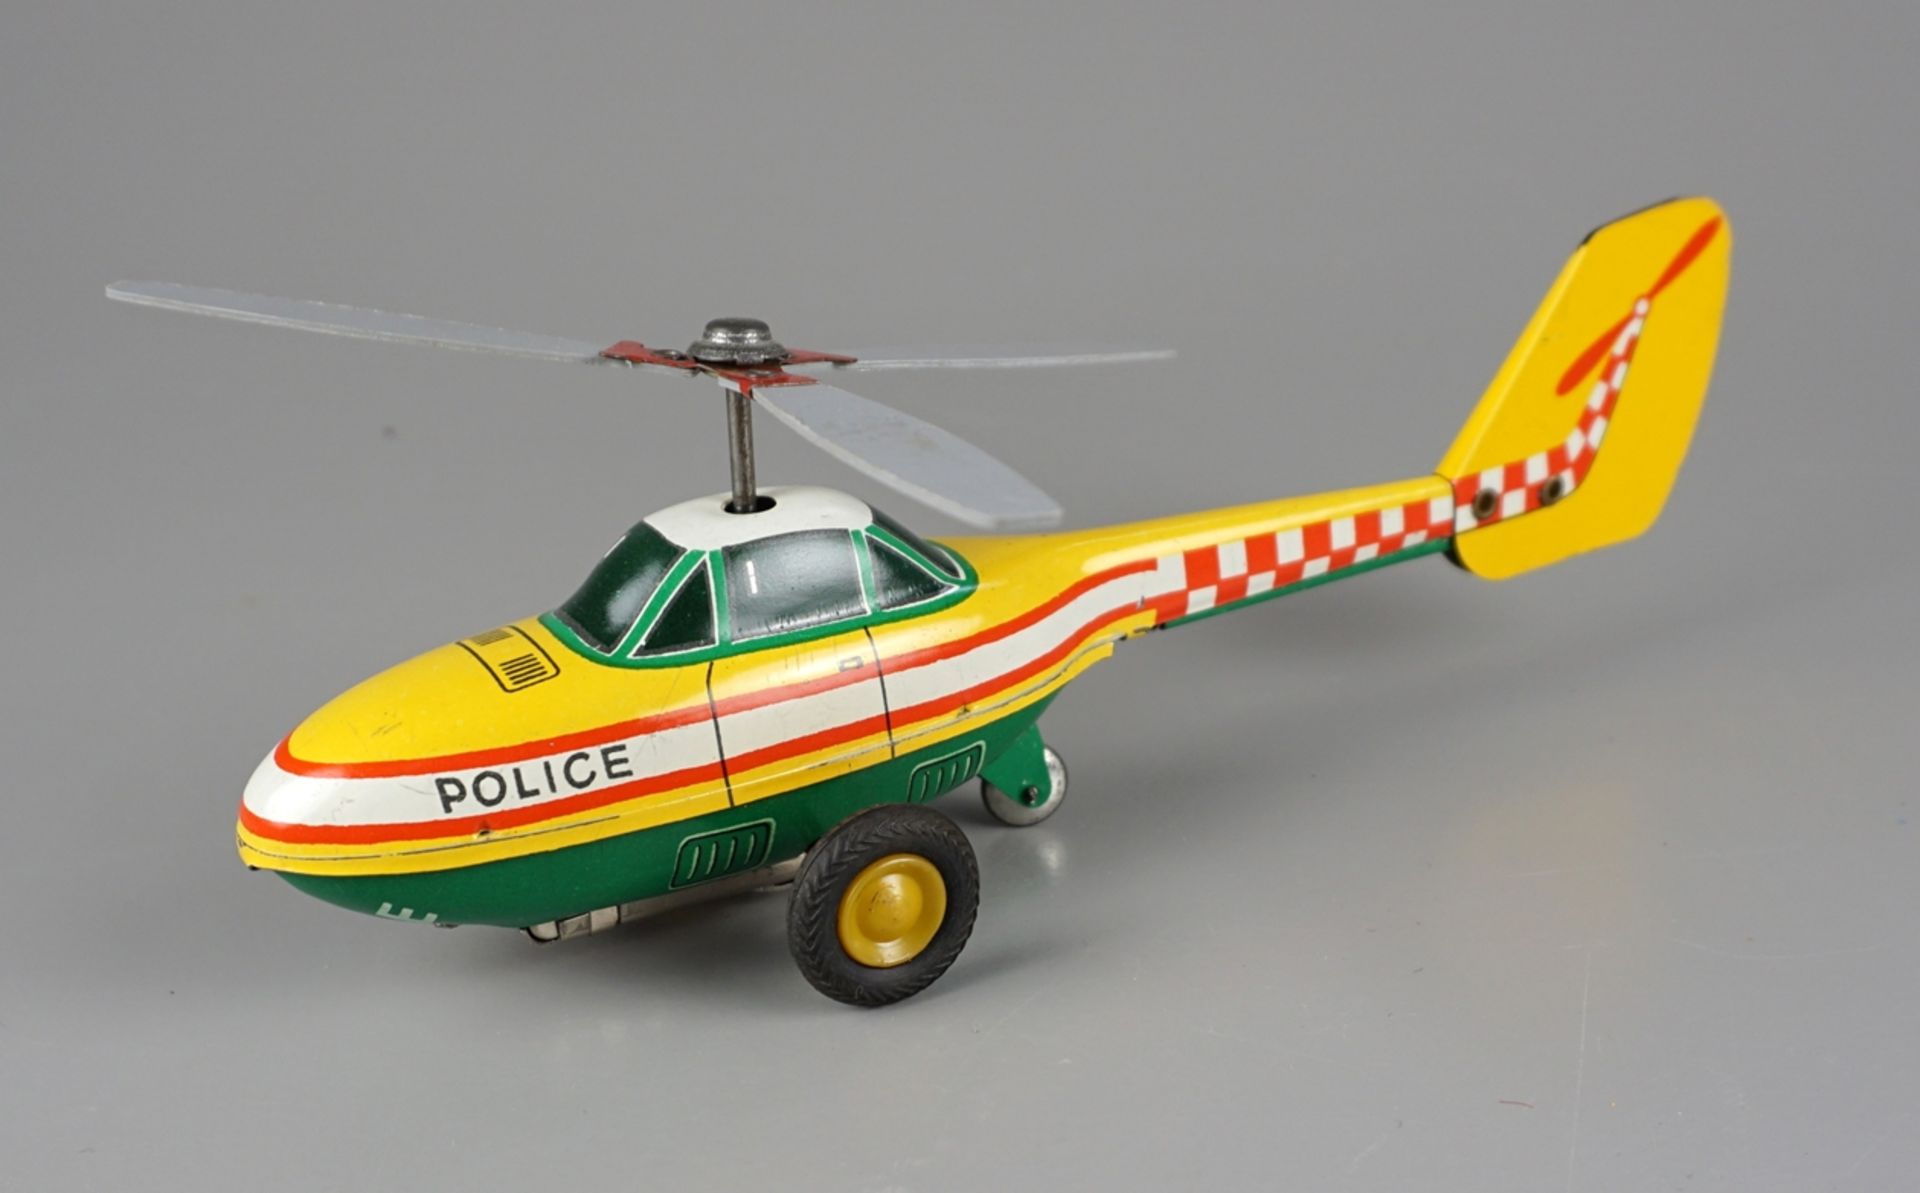 Police helicopter "Police", GDR - Image 2 of 2